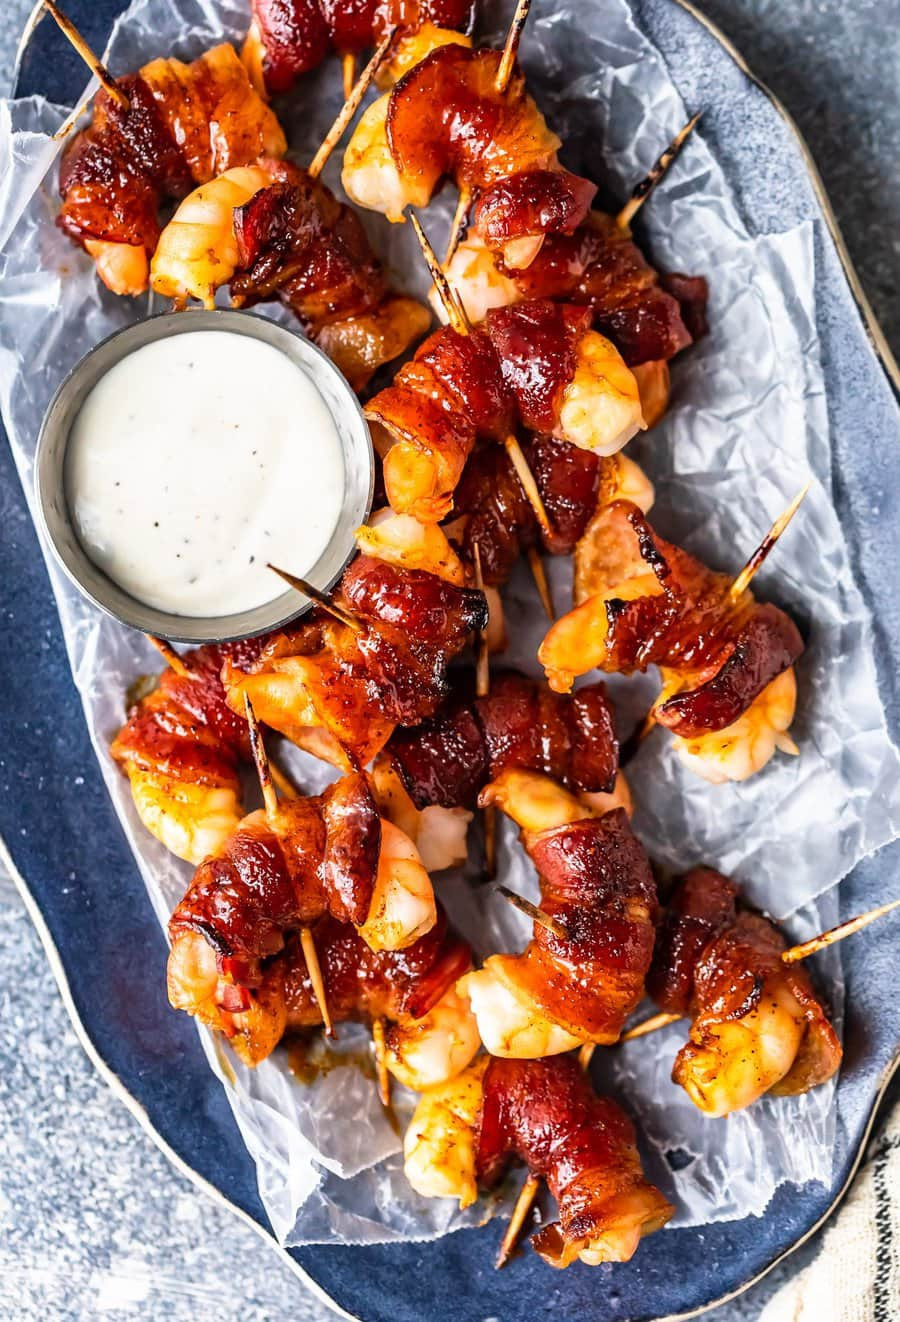 Bacon Appetizer Recipes Unique 30 Best Easy Bacon Appetizers Best Recipes Ideas and